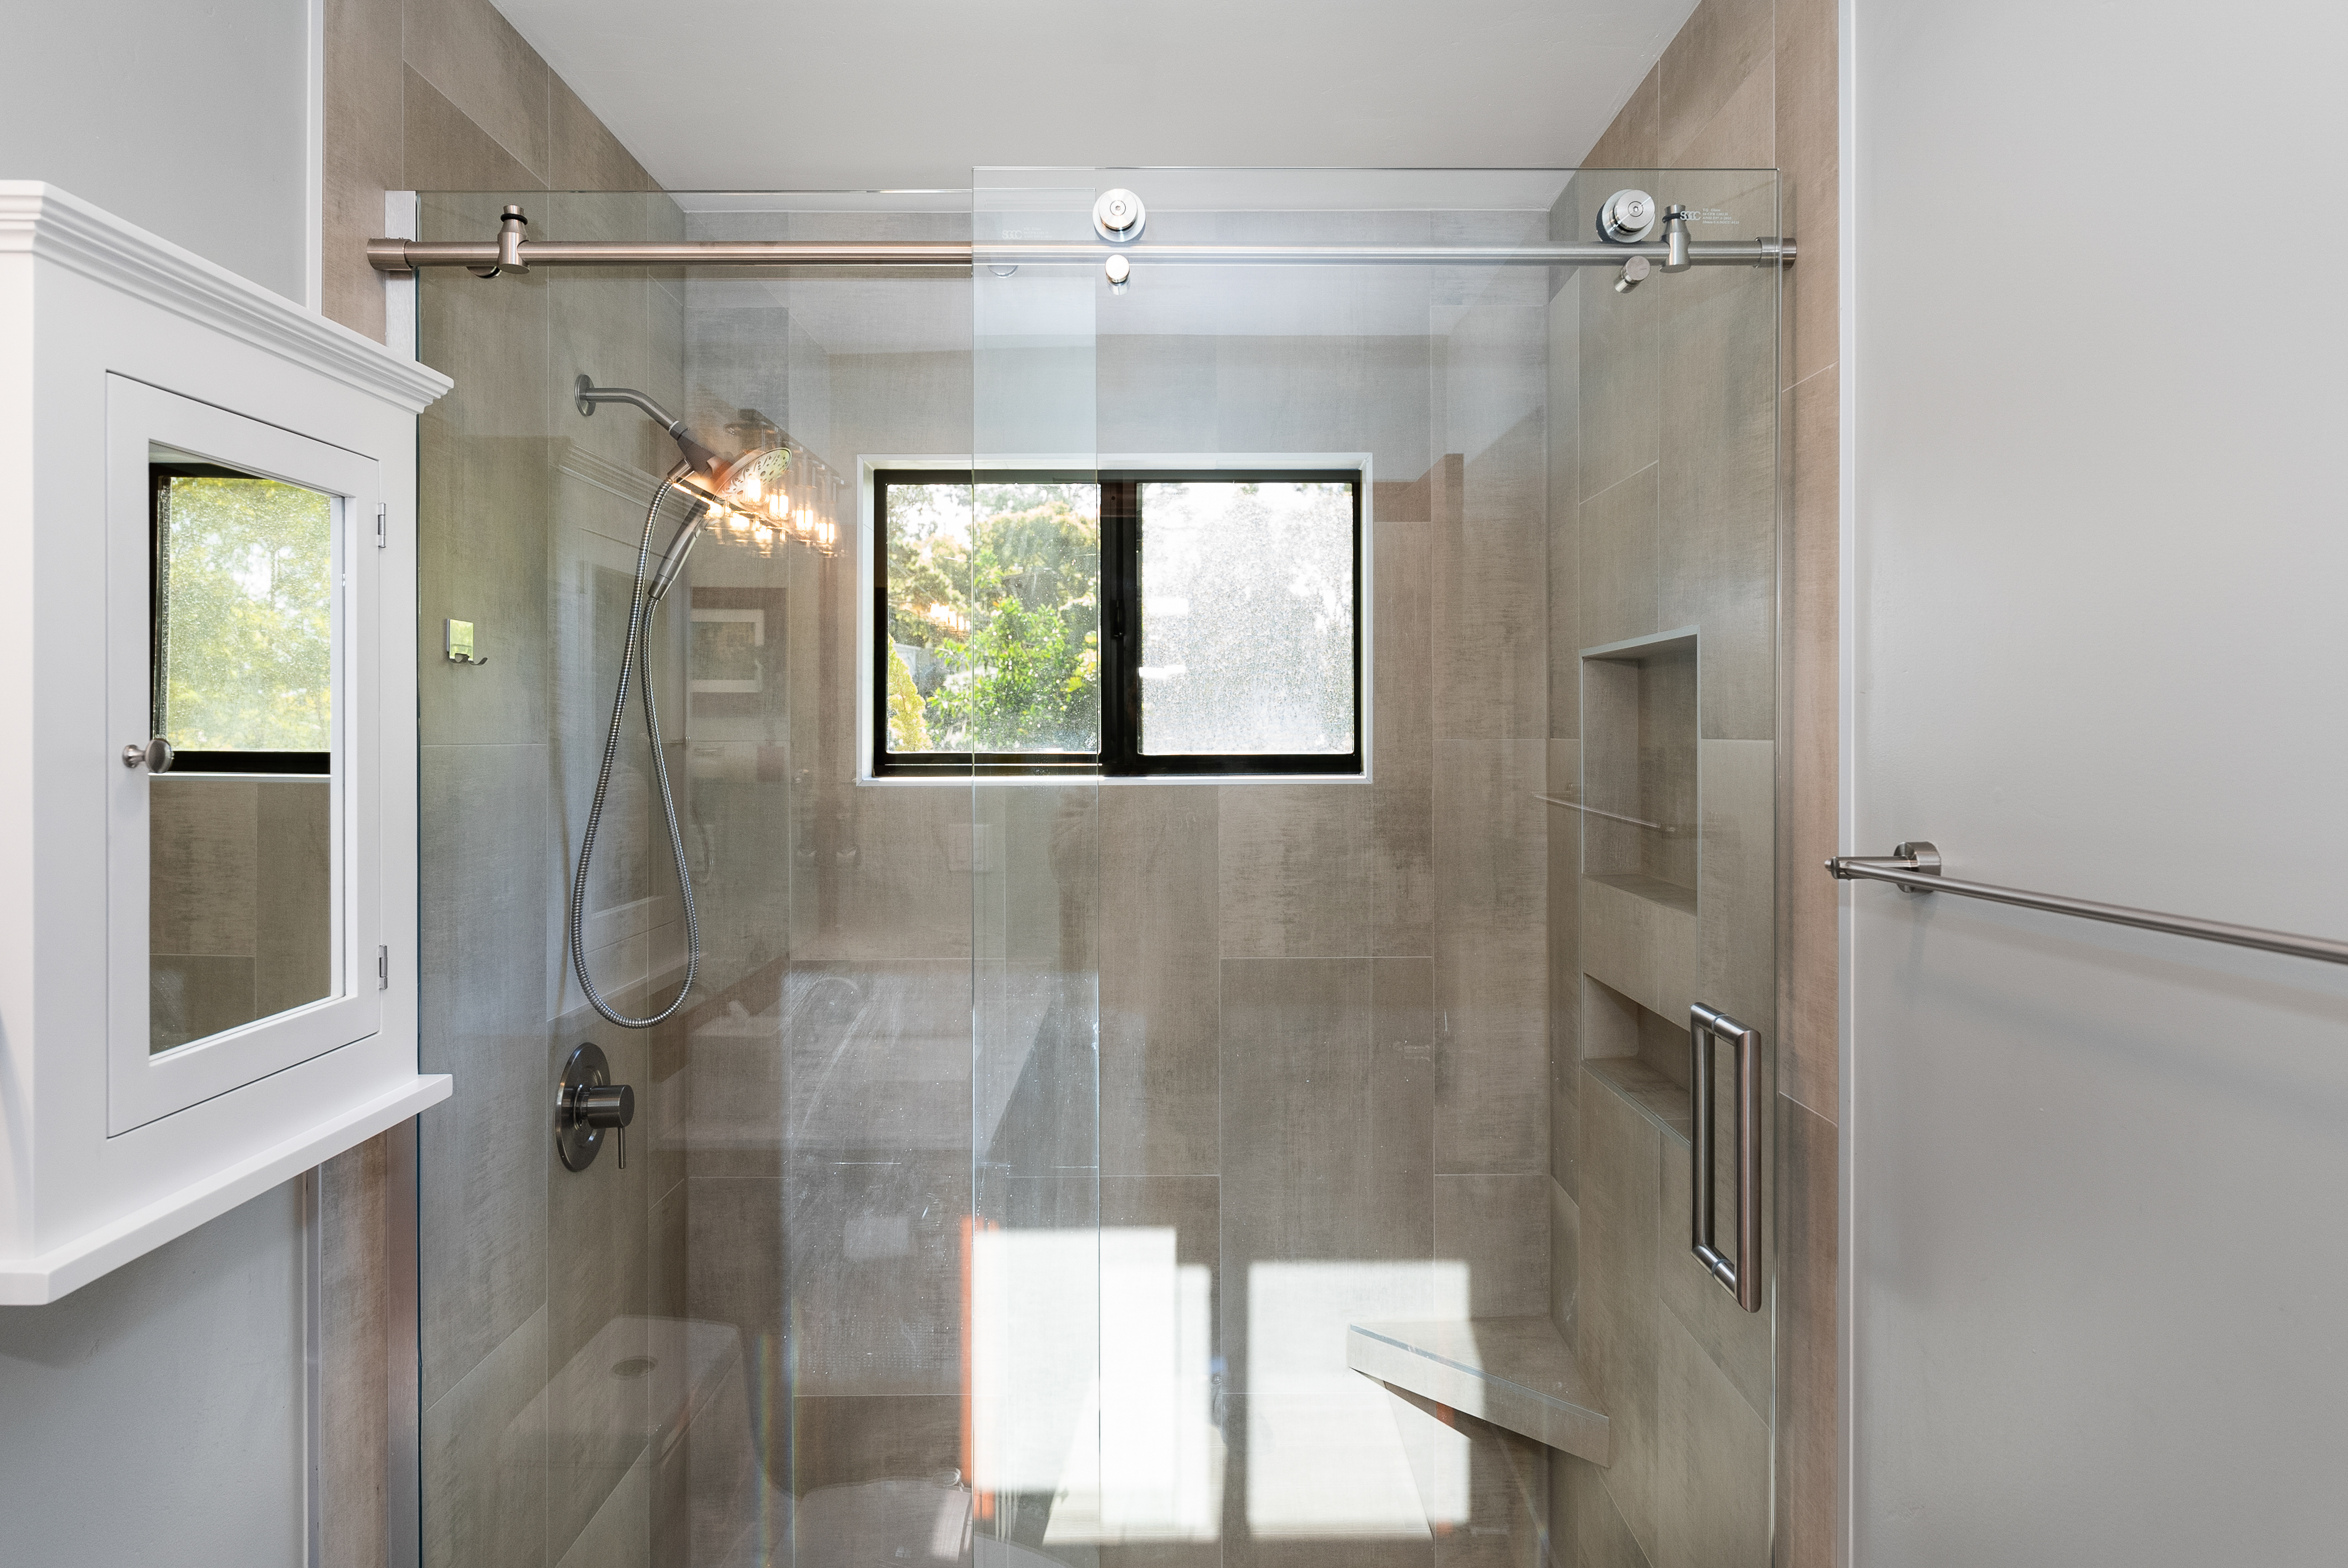 Modern bathroom with glass-enclosed shower area